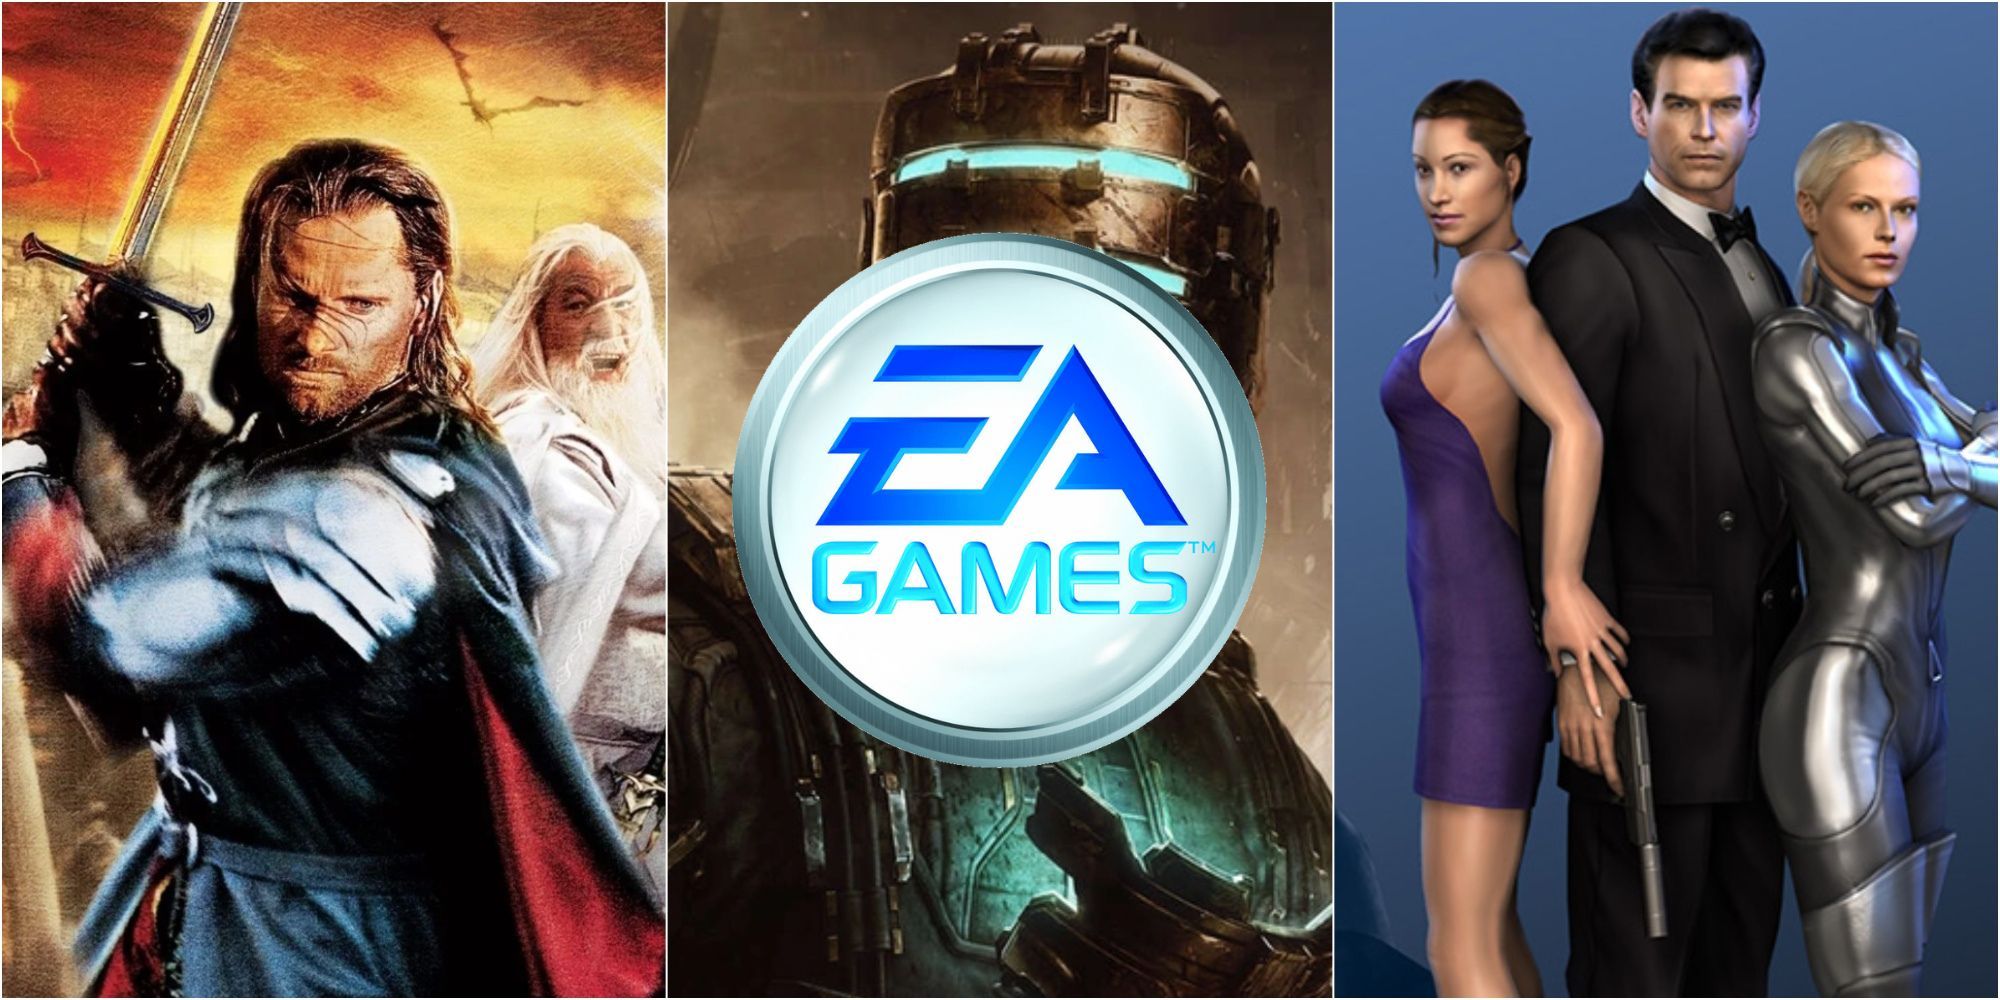 Featured Image with EA Games Logo, showing The Lord Of The Rings: Return Of The King, Dead Space, and James Bond 007: Everything Or Nothing